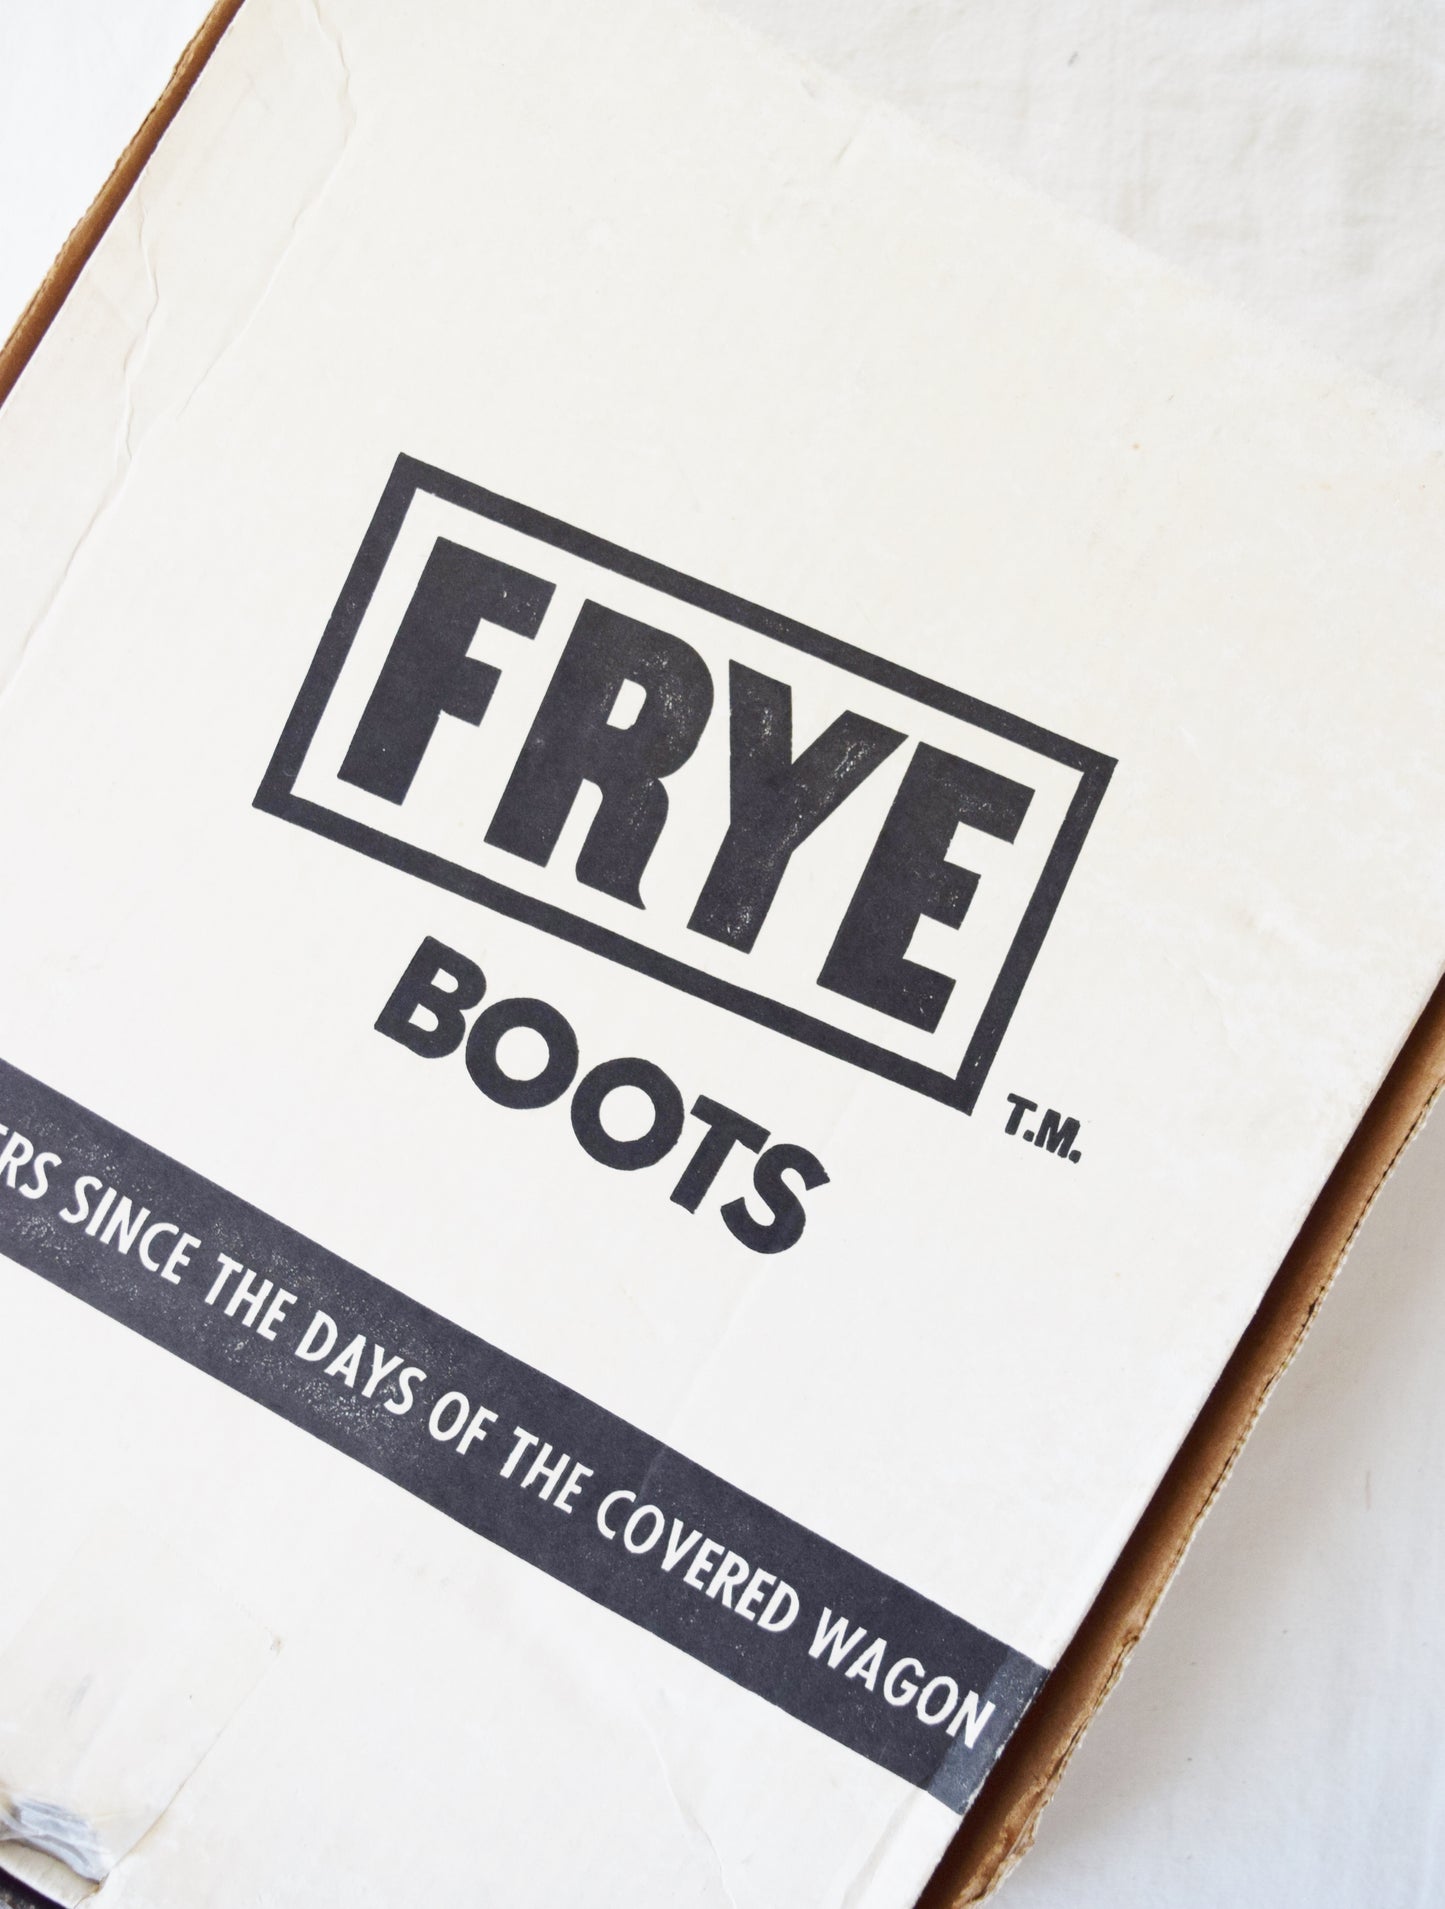 1970s Frye Campus Boots | Vintage Frye Boots | Banana Tan Frye Boots | Women's US Size 5